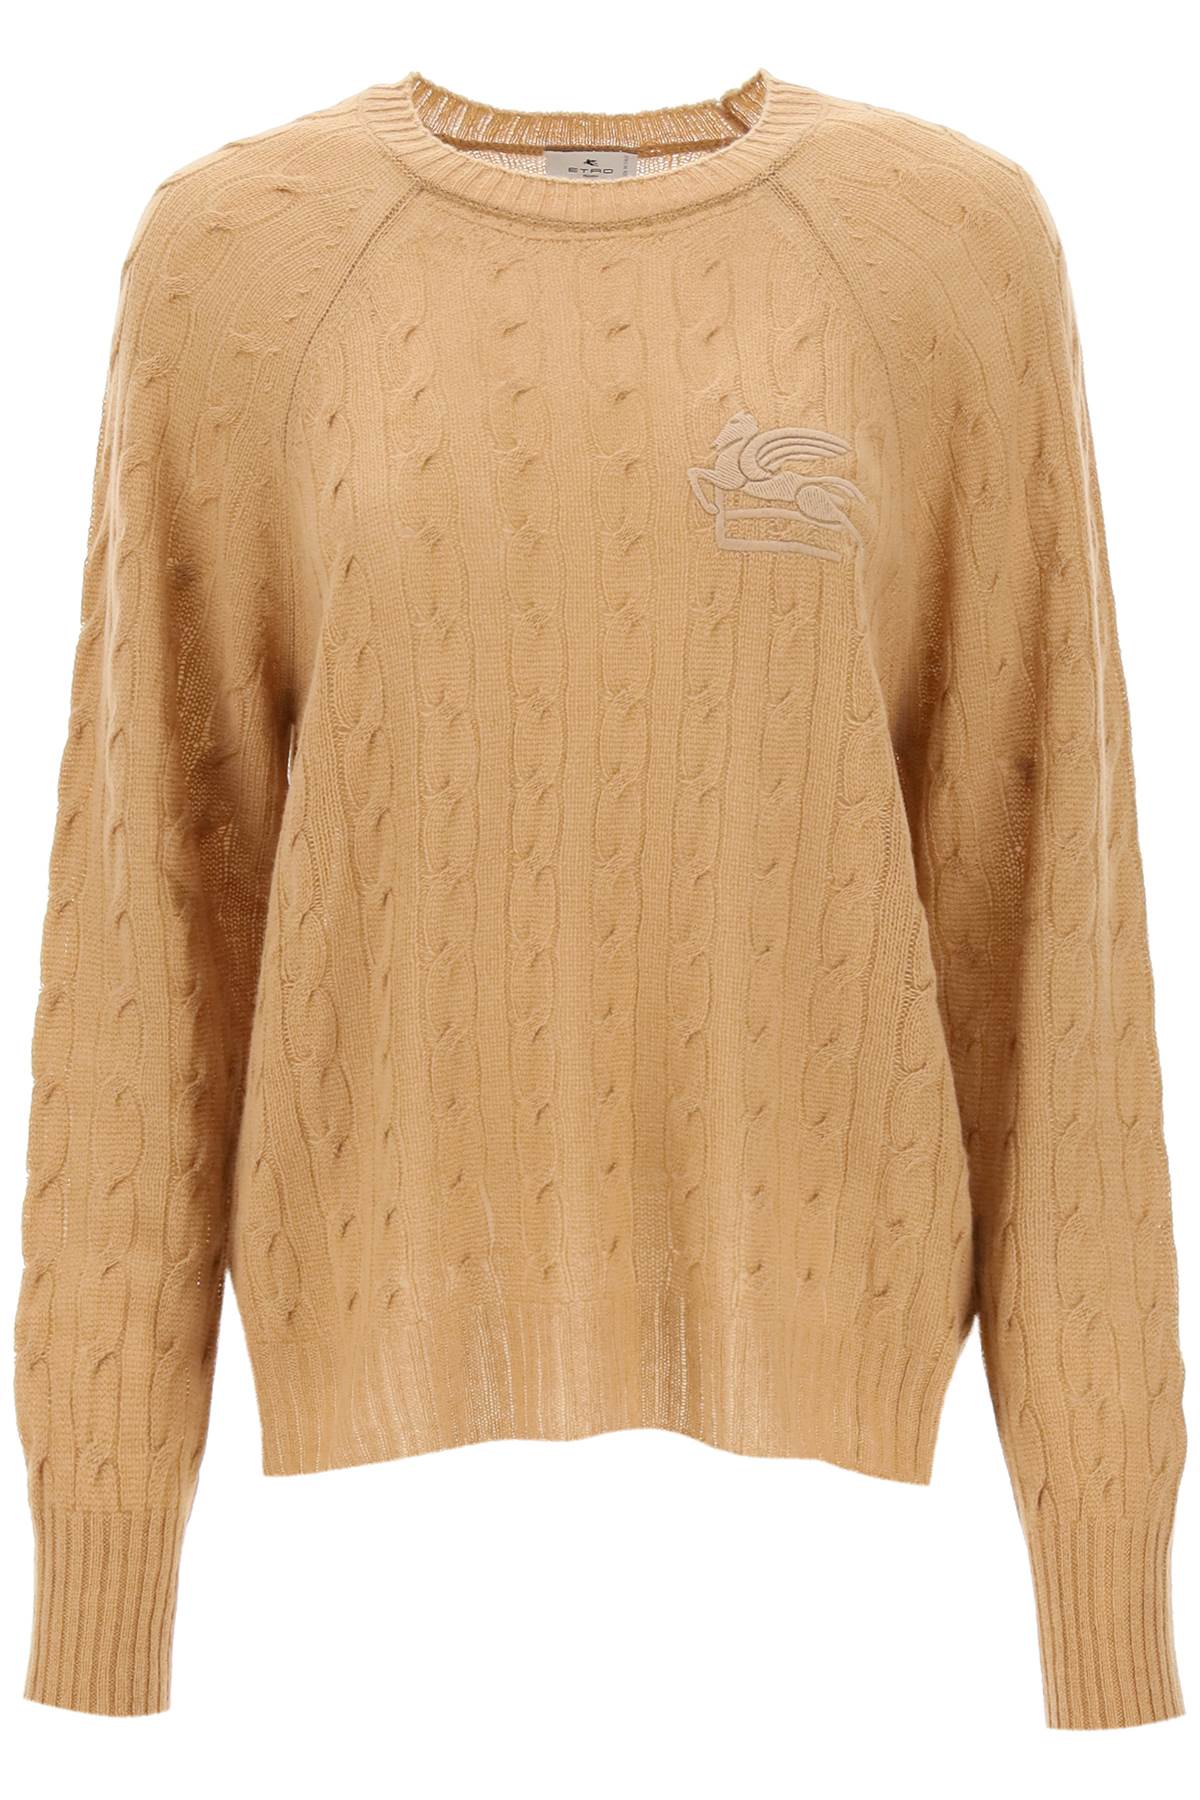 Etro cashmere sweater with pegasus embroidery-0